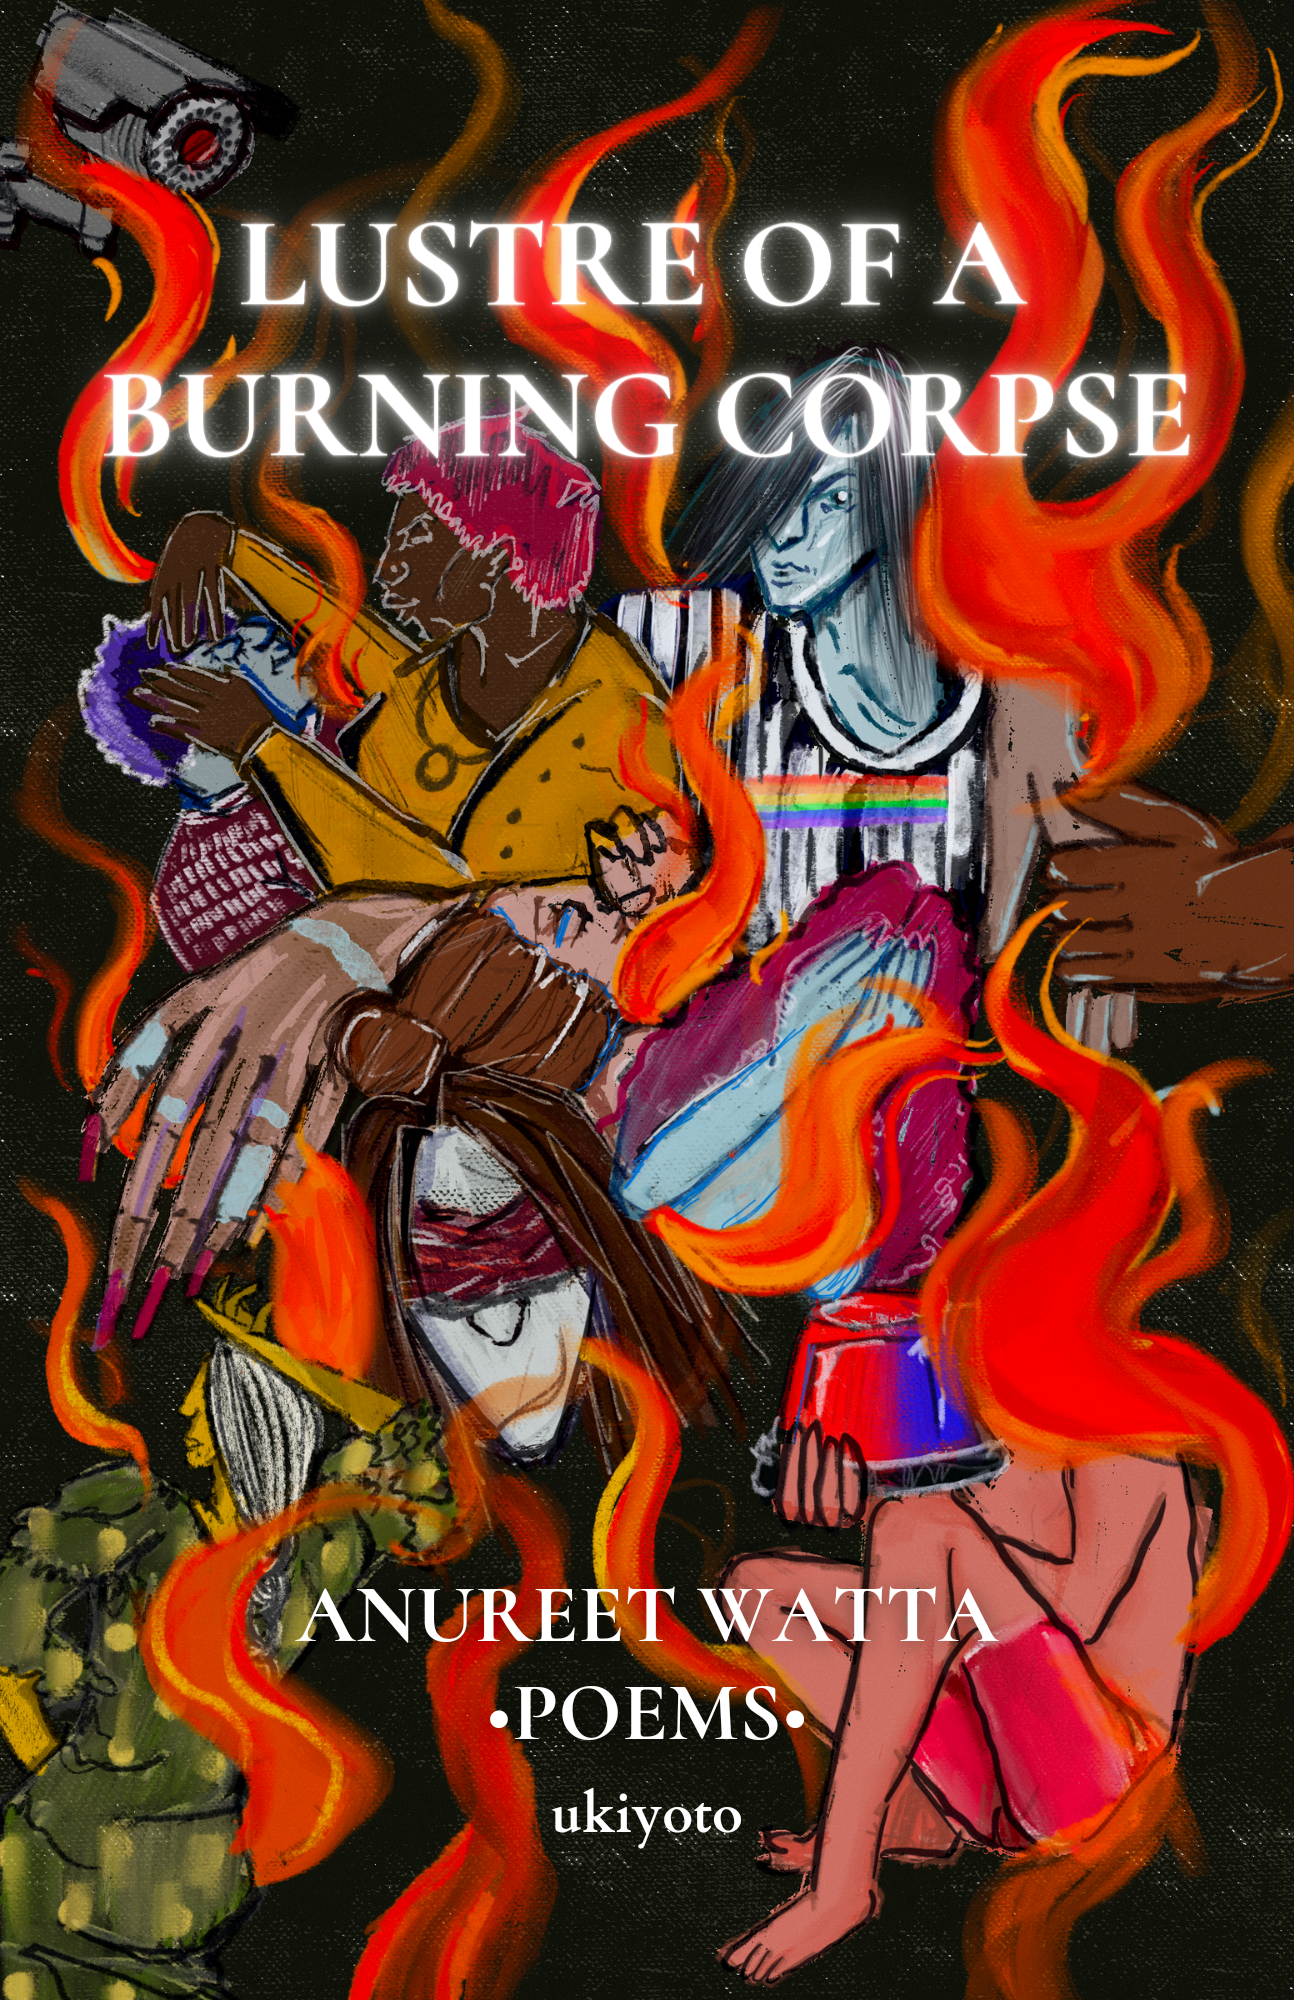 Interview | “I Write First As A Lover, Then As A Poet”: Anureet Watta On Their Stunning Poetry Collection ‘Lustre Of A Burning Corpse’￼